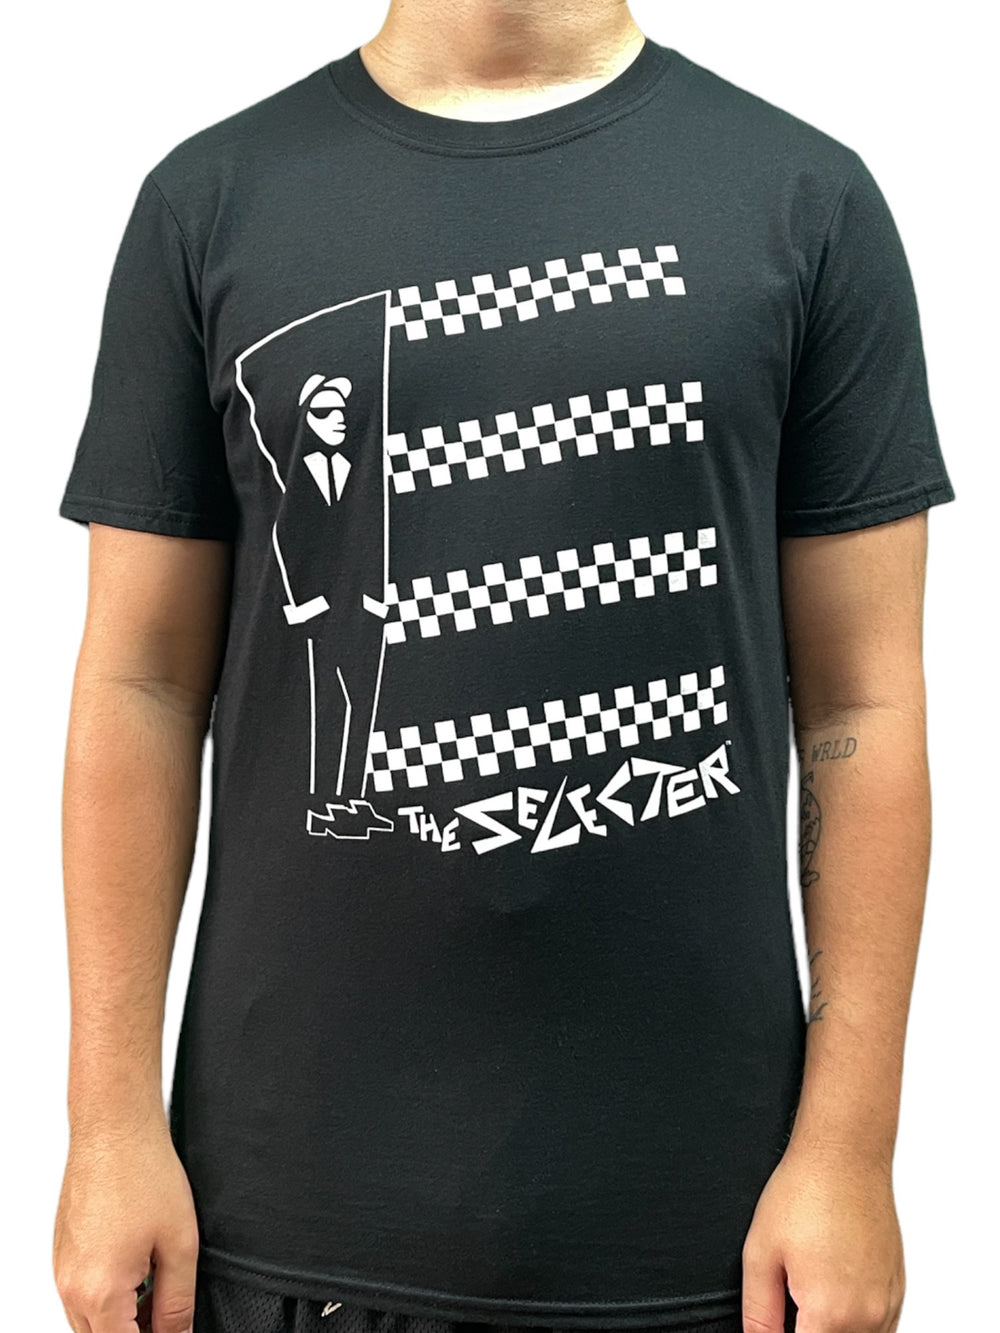 Selecter Two Tone Black Unisex Official T Shirt Brand New Various Sizes